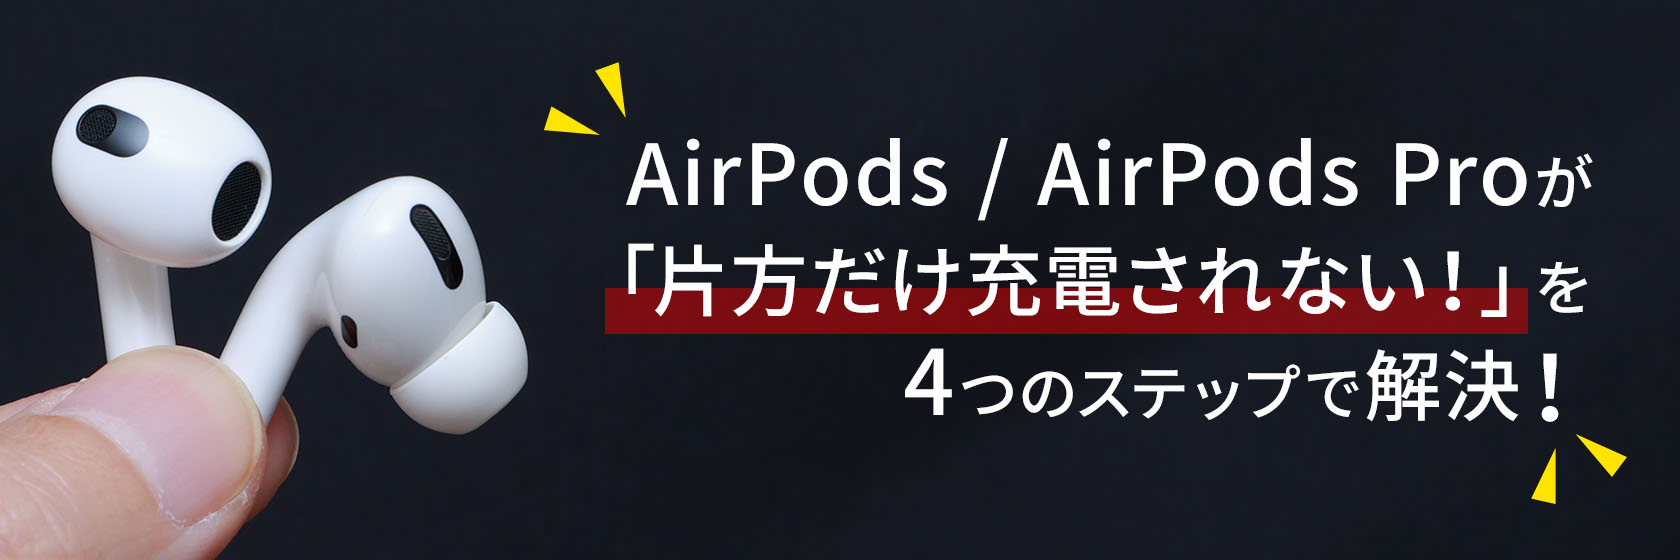 AirPods / AirPods Pro 片方 充電されない を4つのステップで解決！